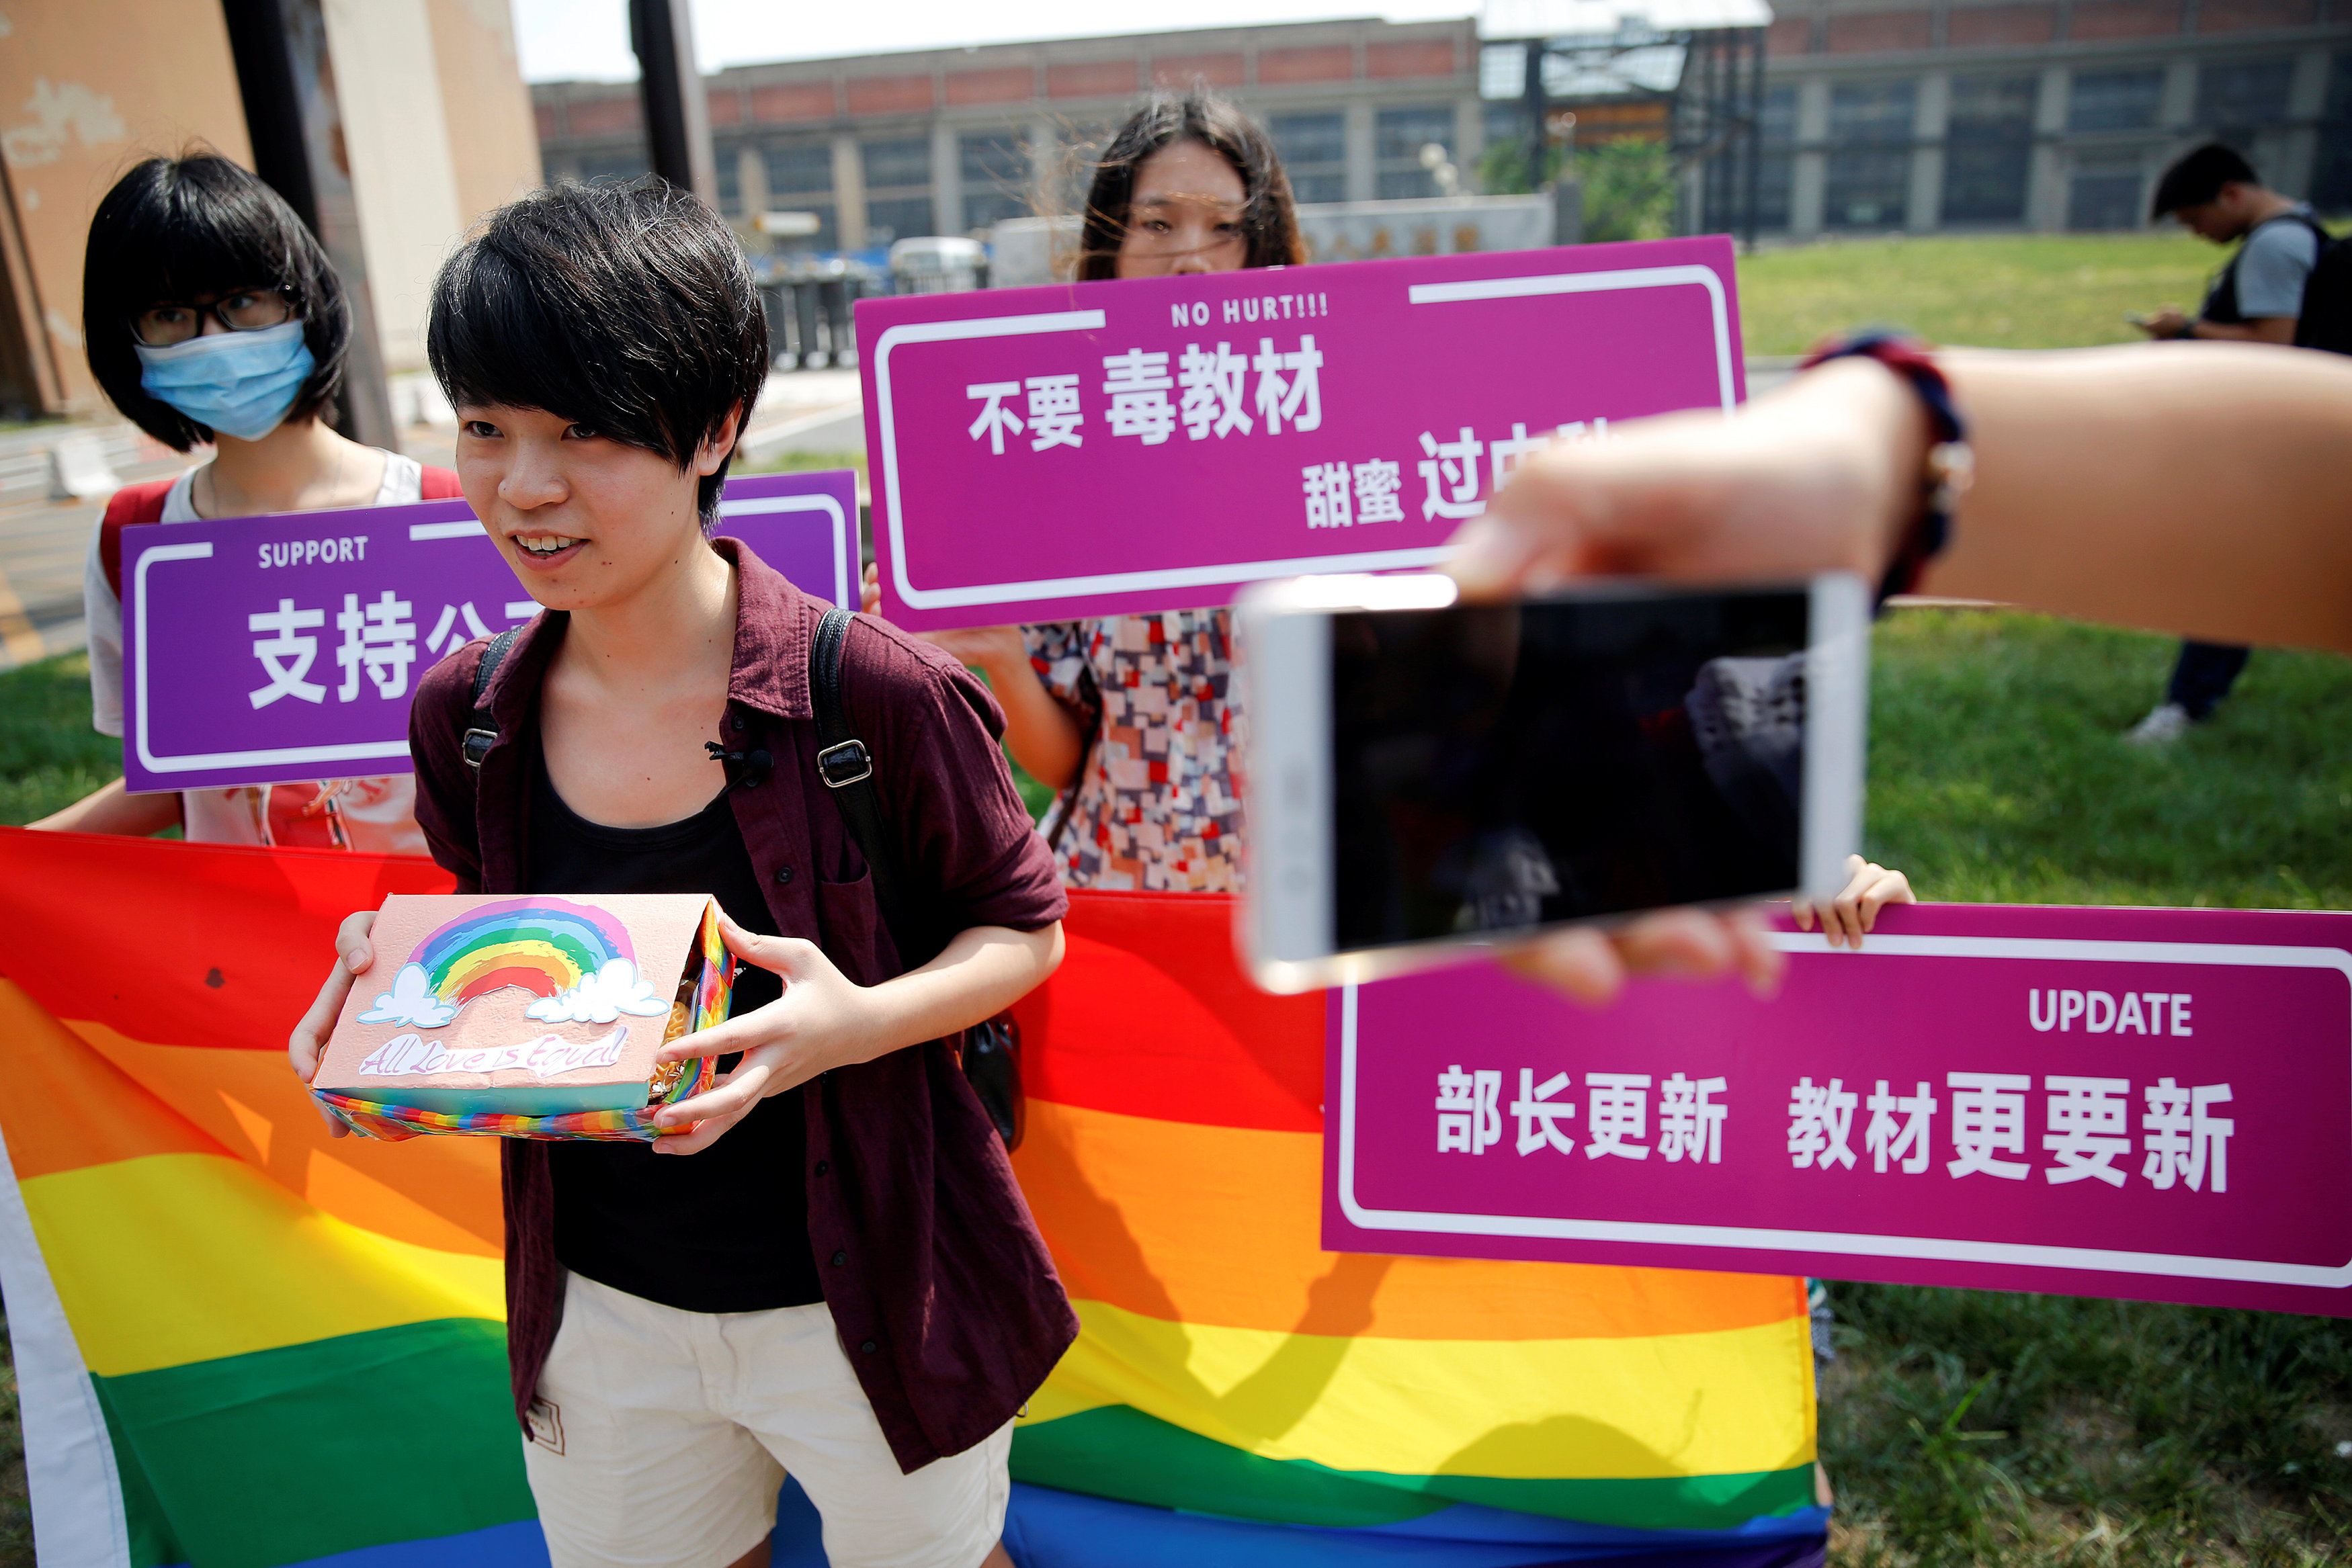 Qiu Bai, a Chinese student who lodged a suit against the Ministry of Education over school textbooks describing homosexuality as a mental disorder, shows the present she prepared for officials near the courthouse before the hearing in Beijing, China Septe